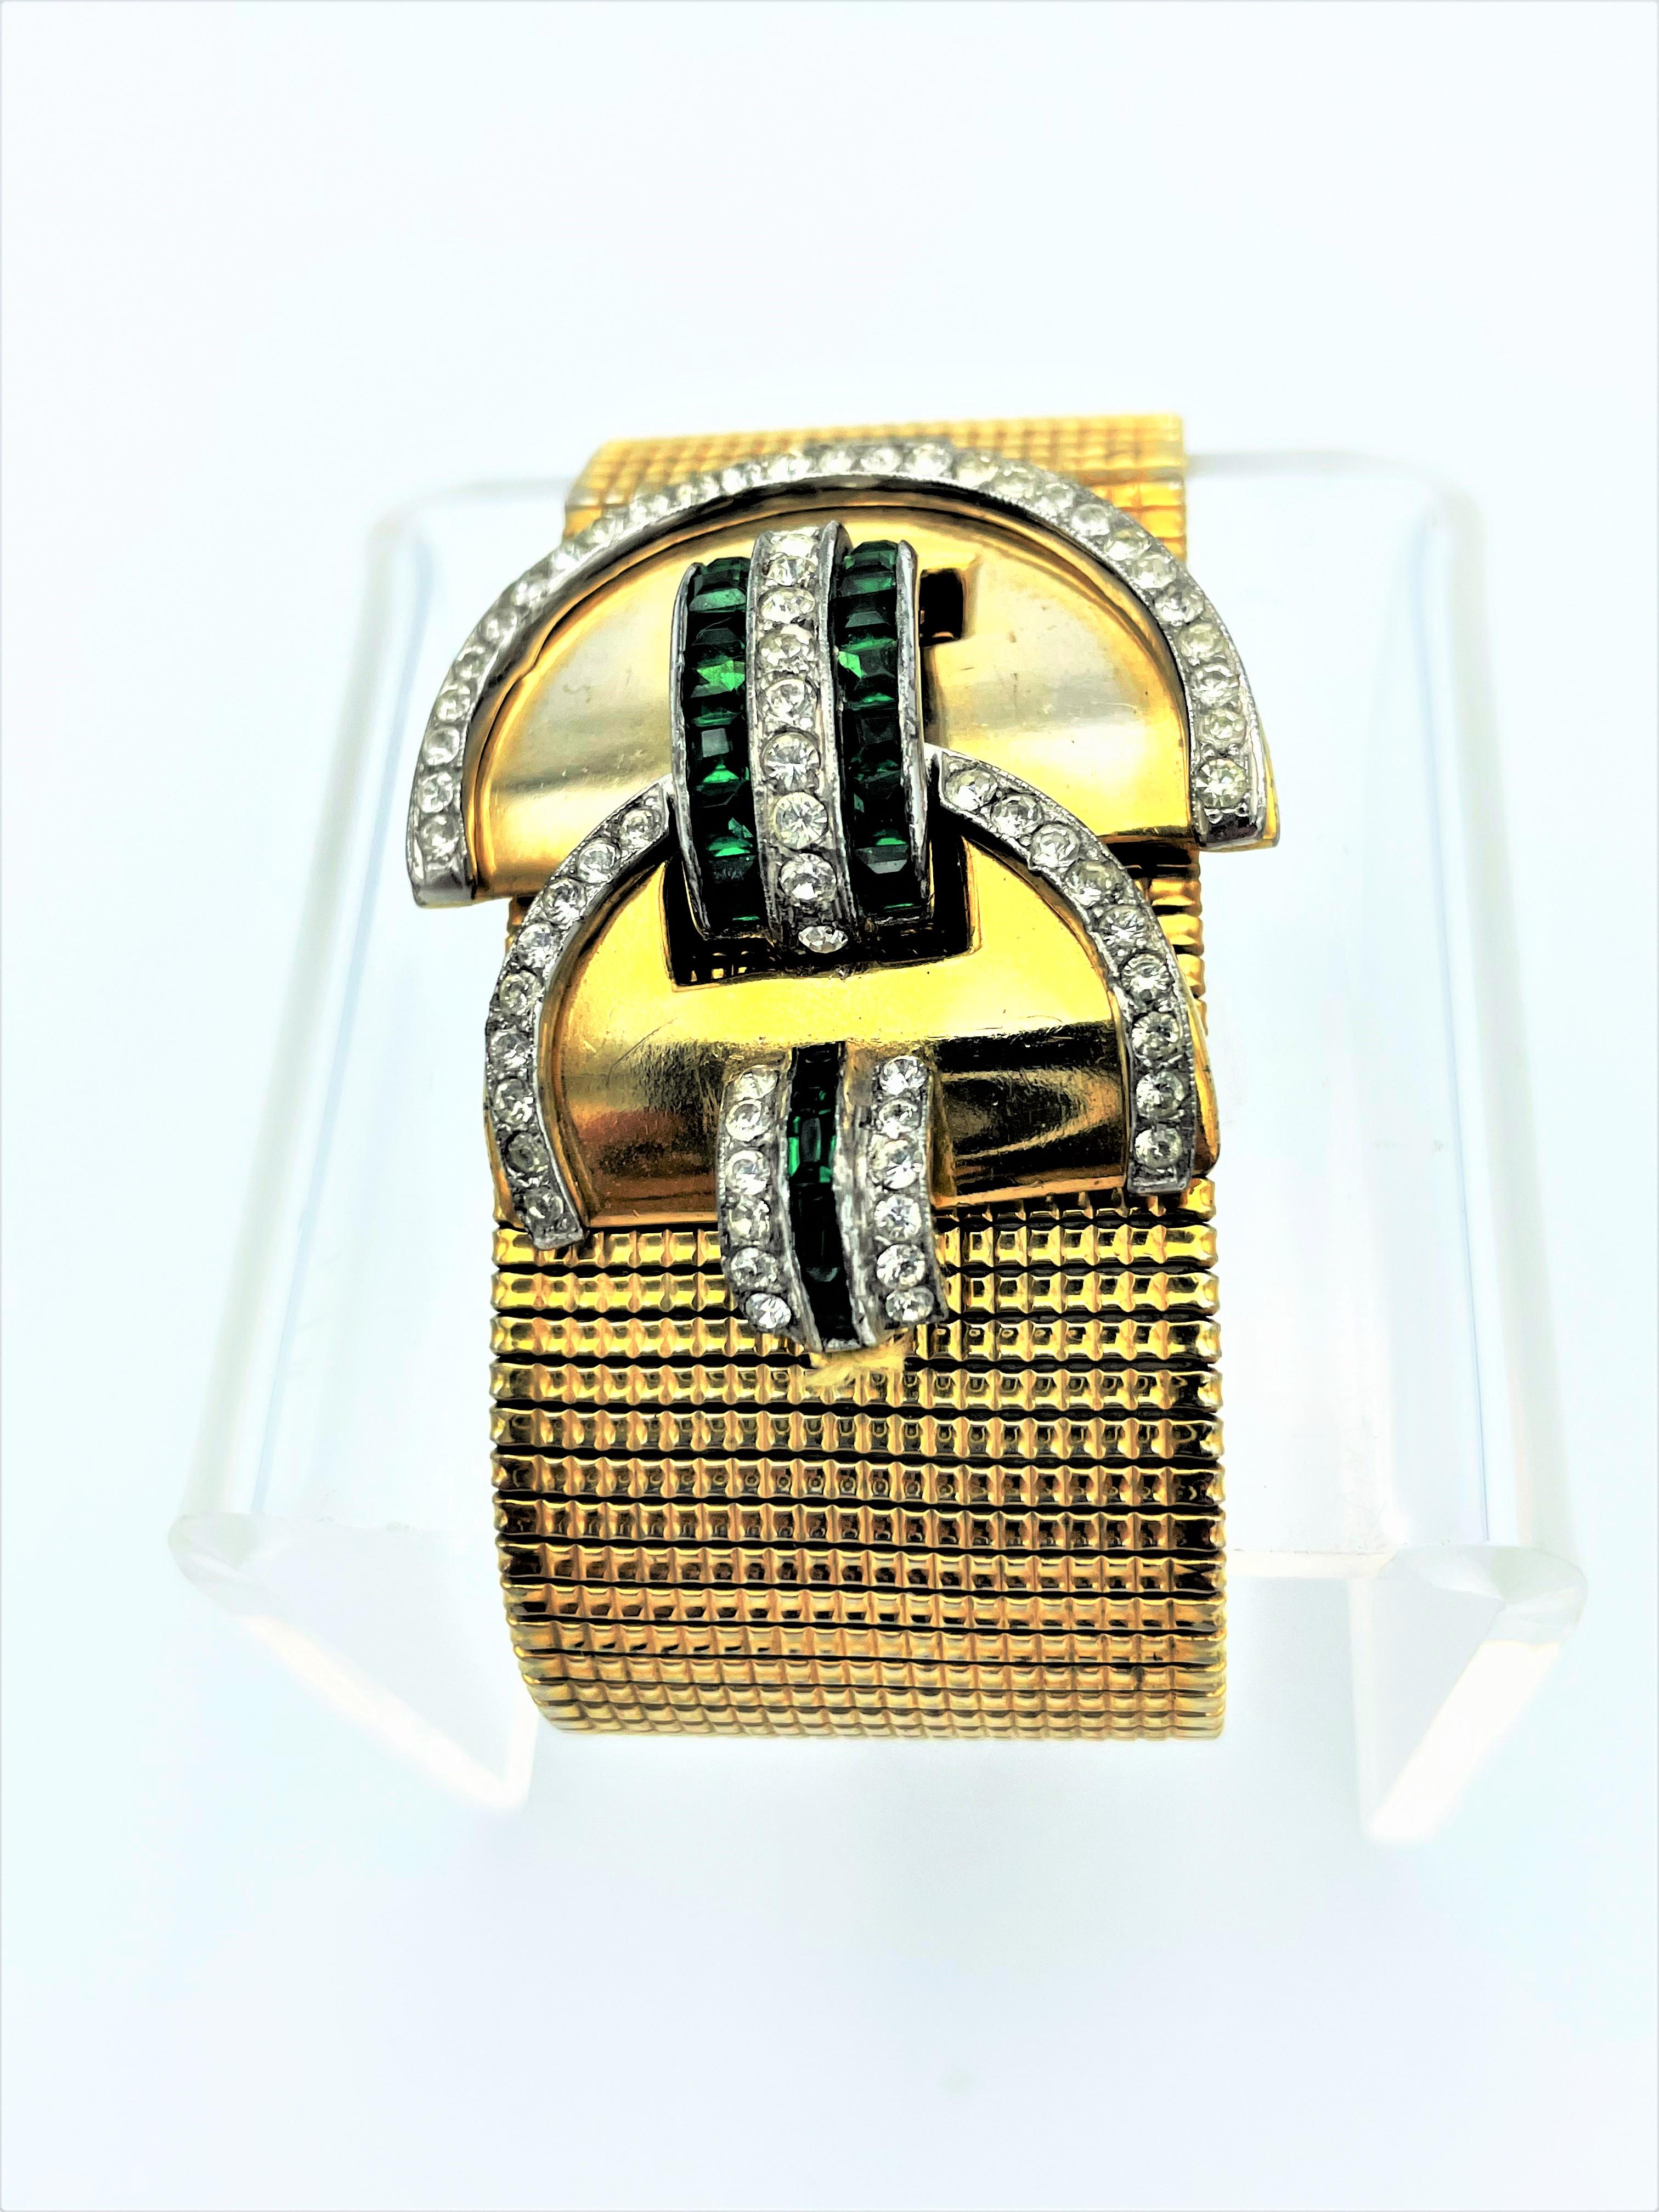 Vintage bracelet by DeRosa NY, deco styl, emerald  and clear rhinestones, 1940s 4